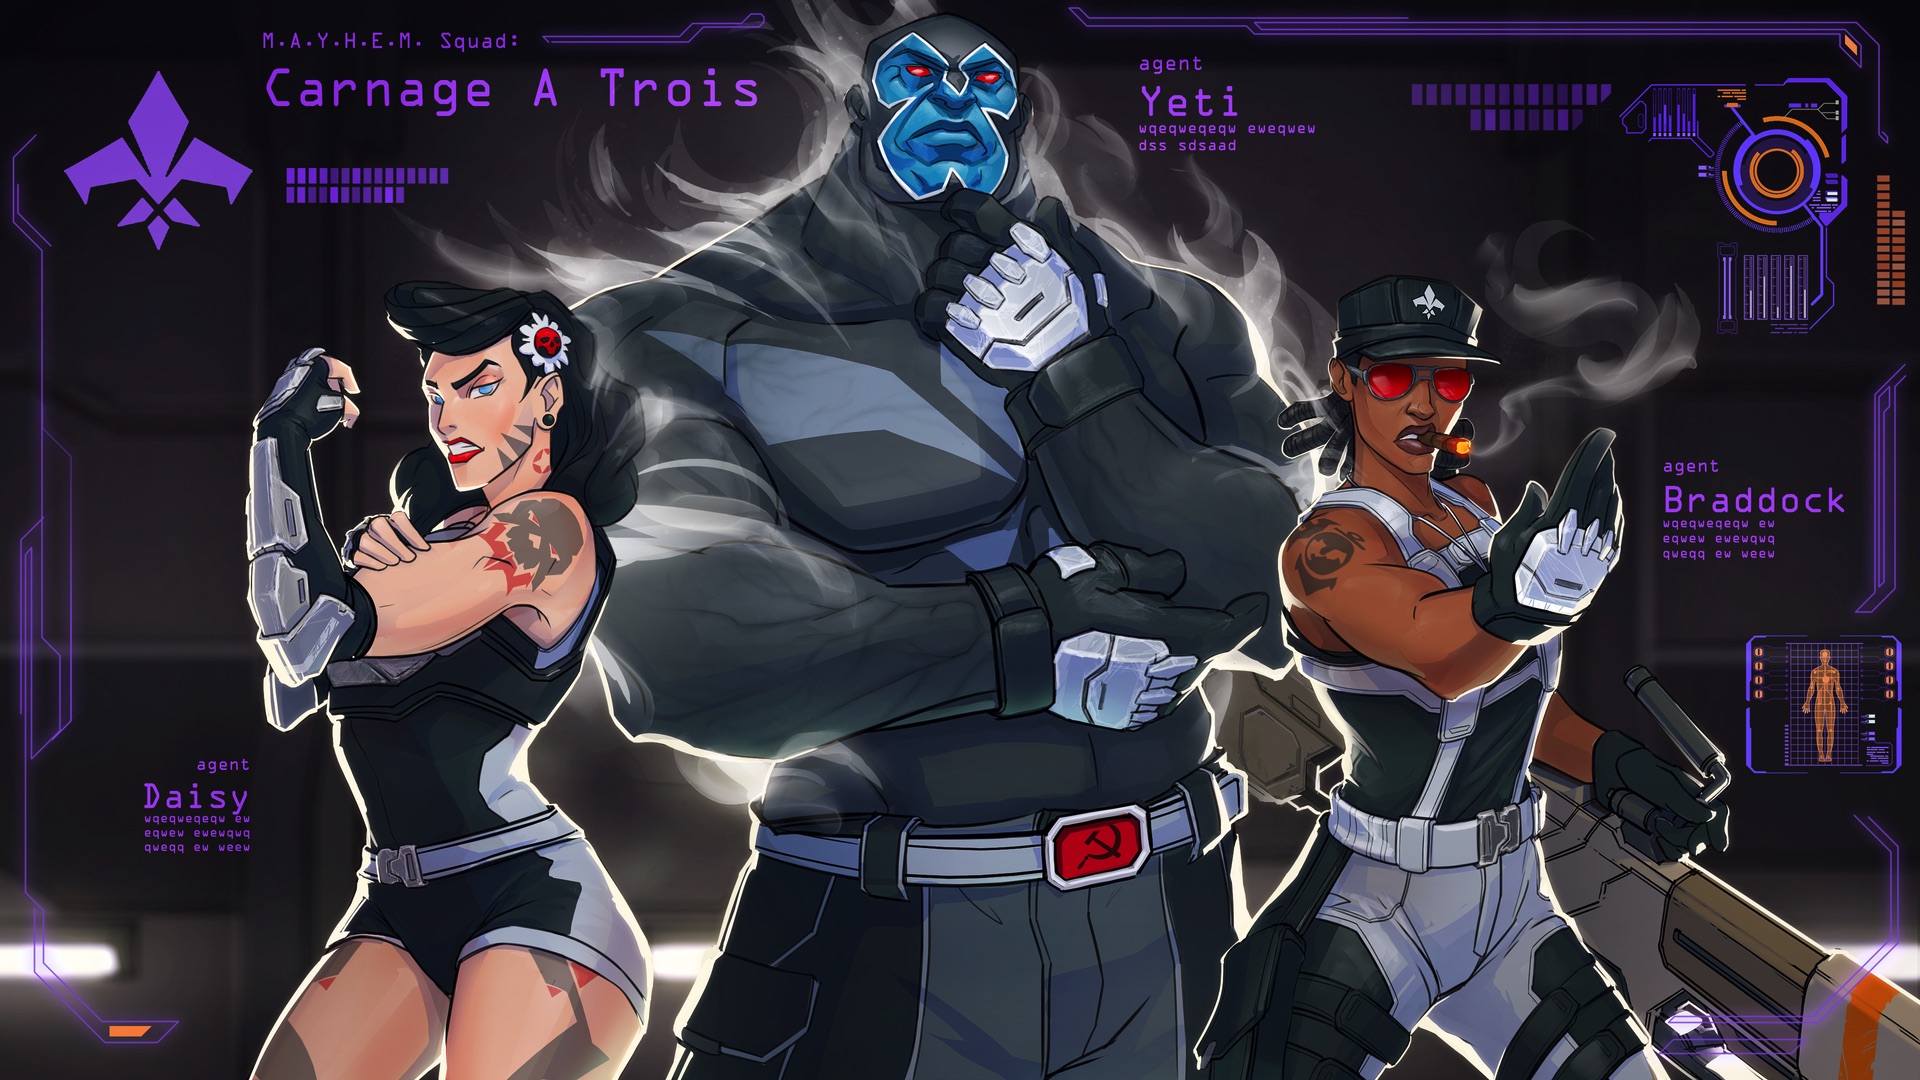 Wallpaper Agents of mayhem, video game, carnage a trois